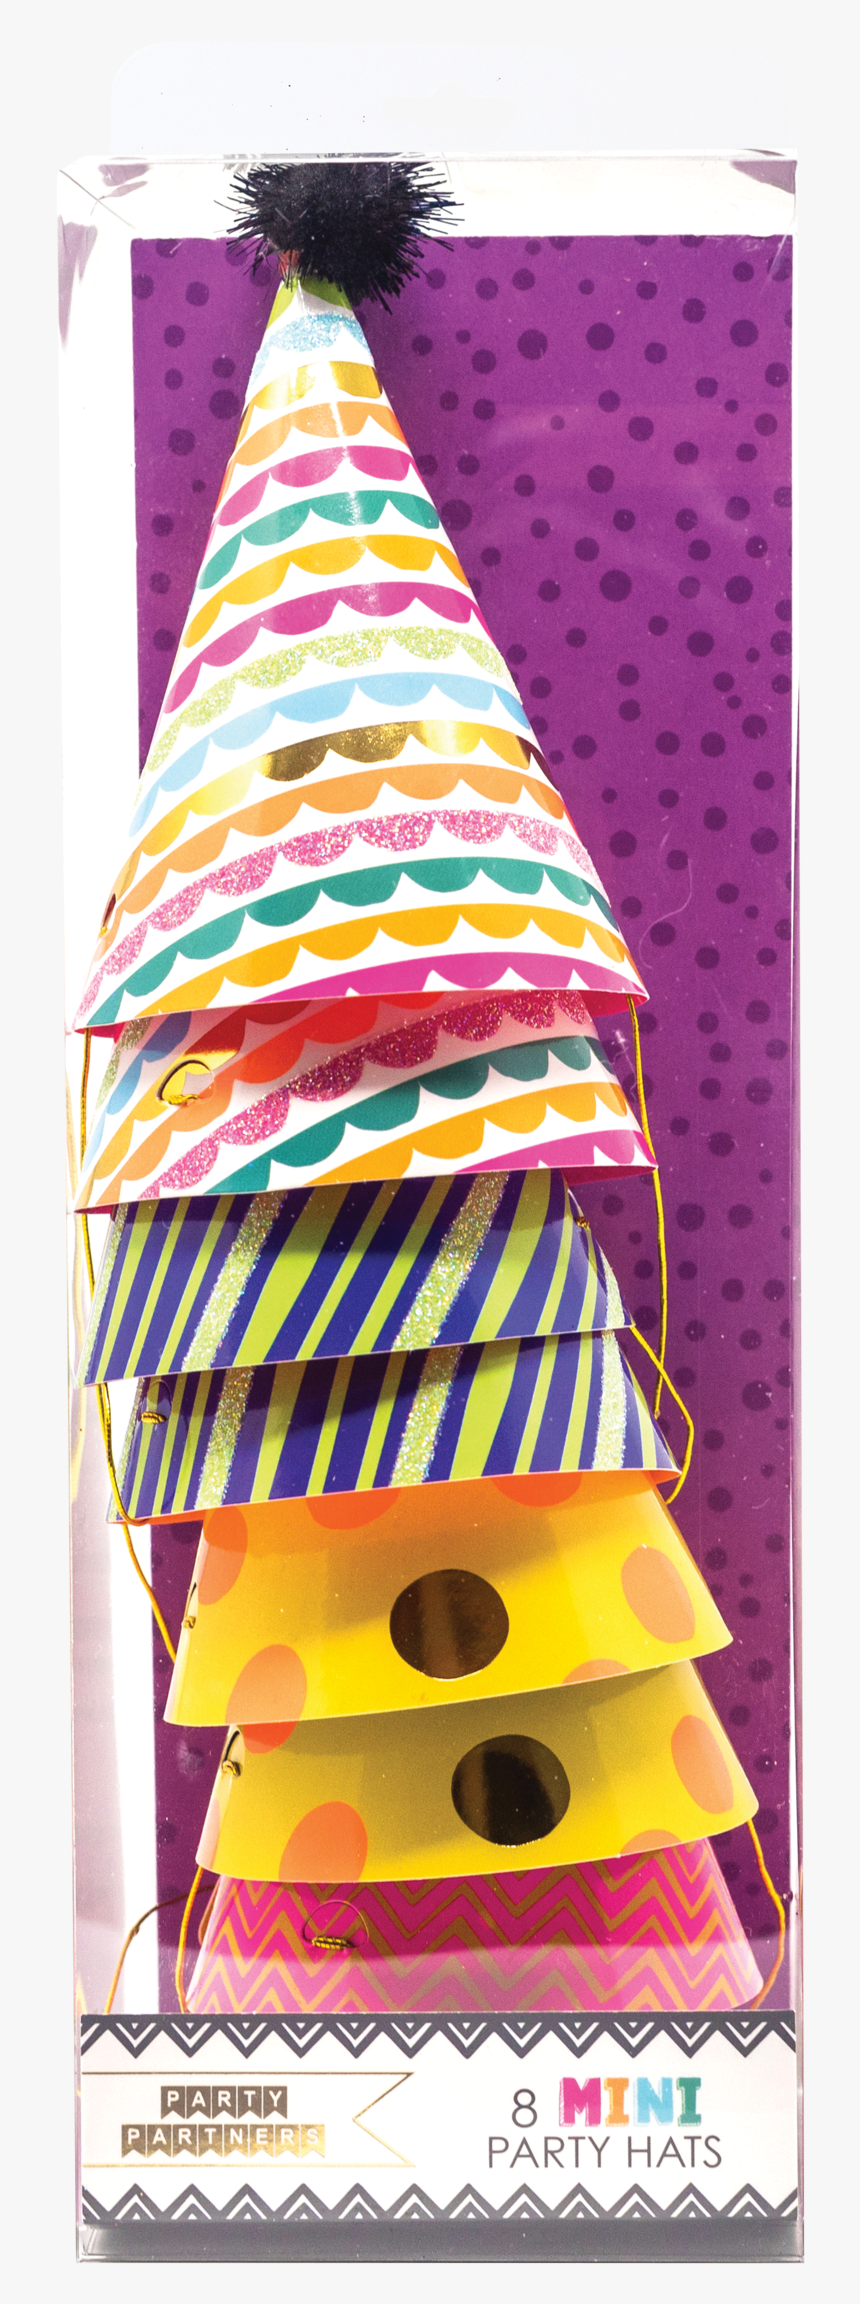 Party Hats Png, Transparent Png, Free Download